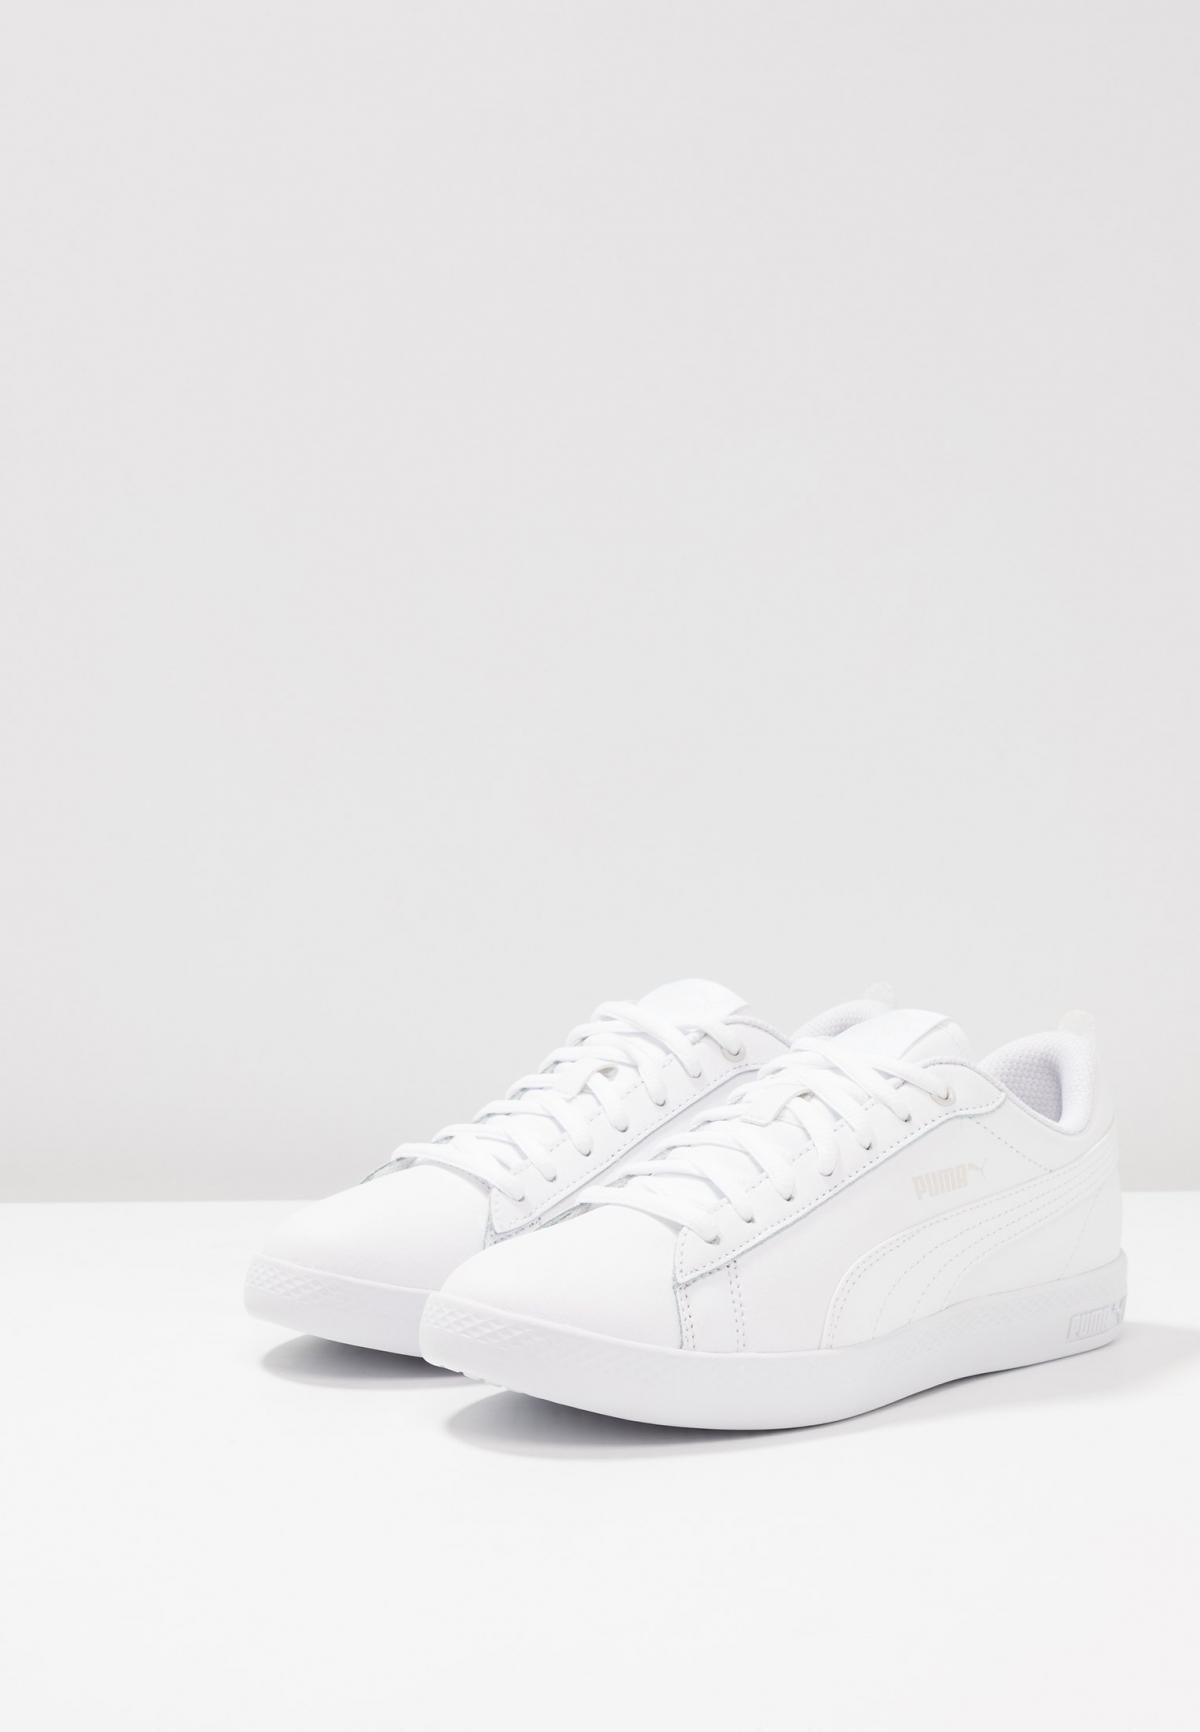 Les sneakers blanches